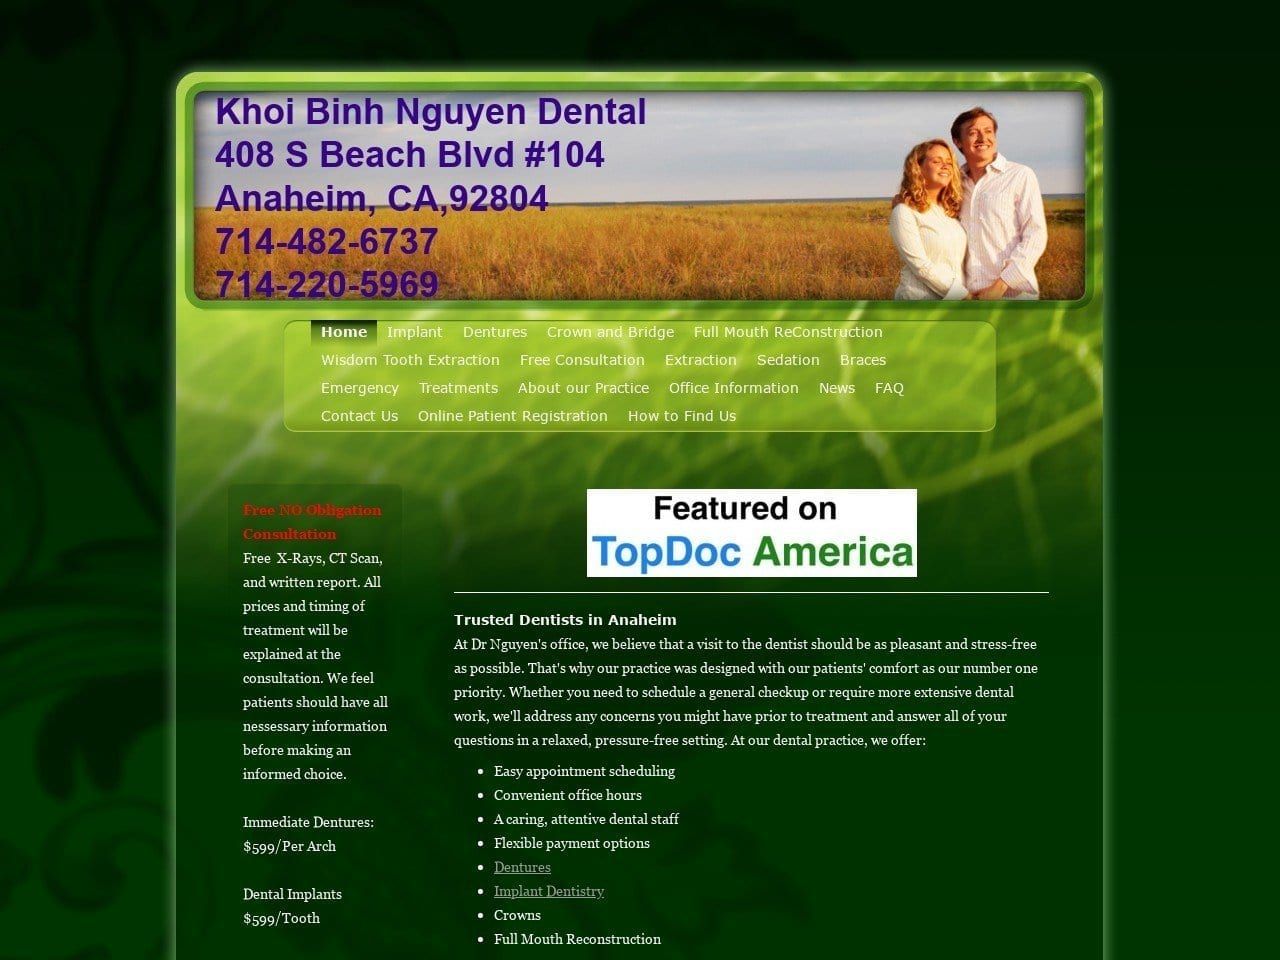 Dr. Zhang Dds. Family And Cosmetic Dentist Website Screenshot from drzhangdds.com